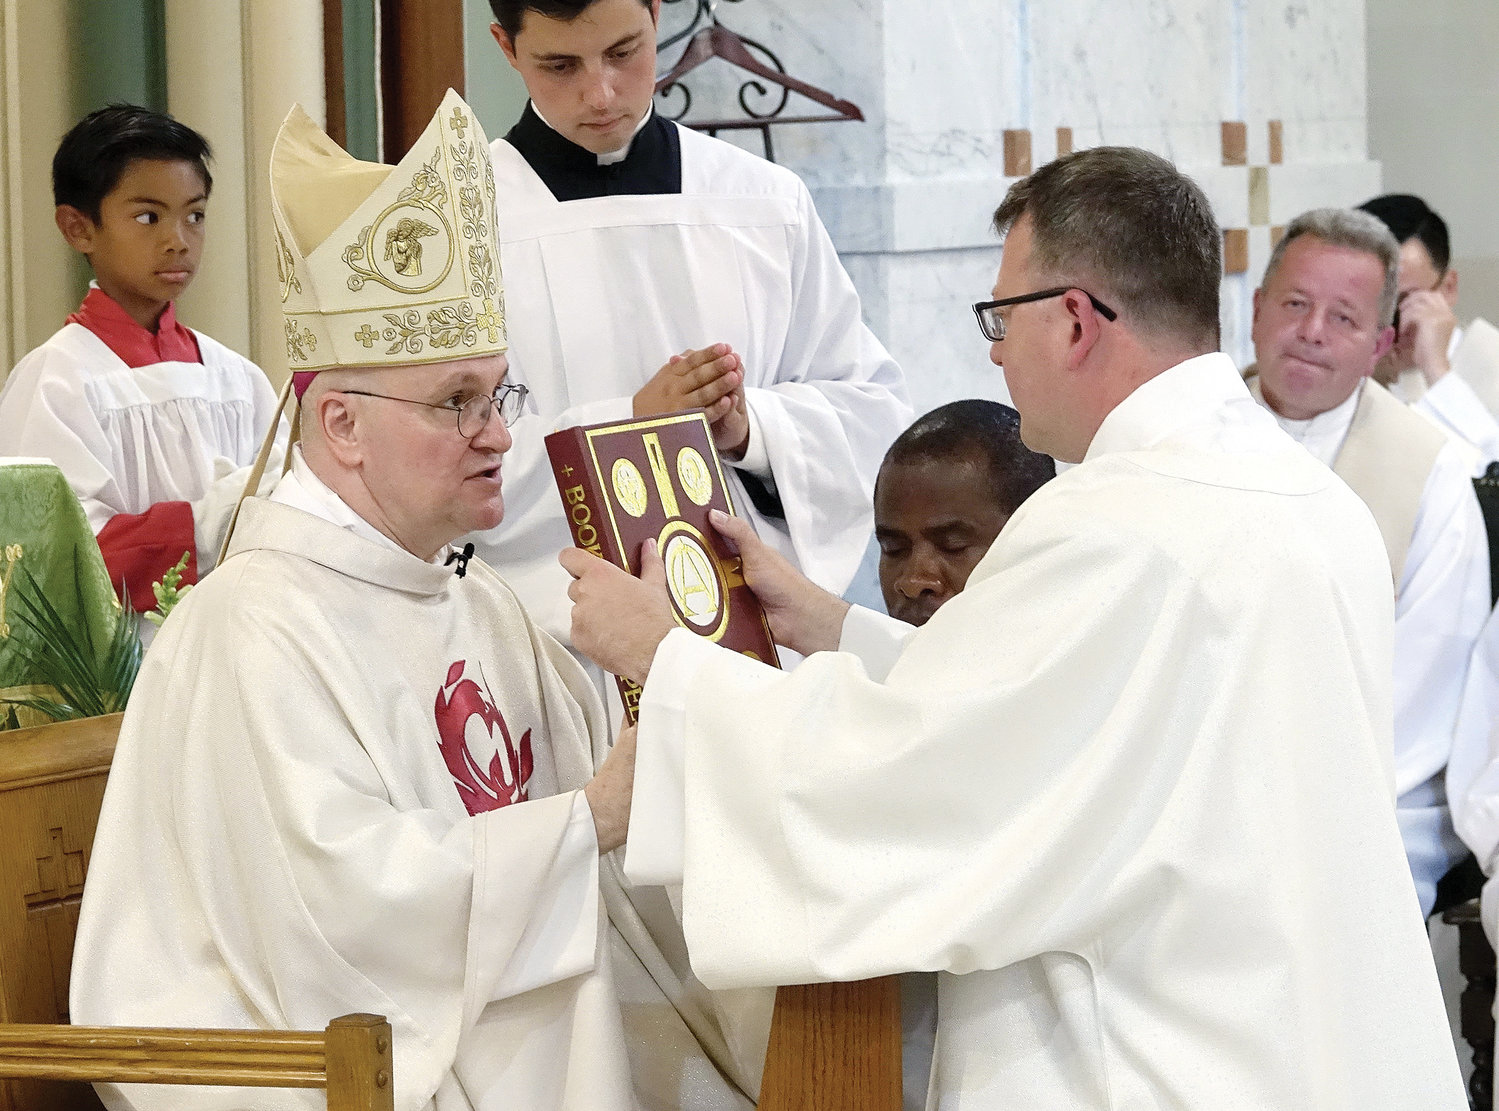 Auxiliary Bishop James Massa, rector of St. Joseph’s Seminary, Dunwoodie, presents Deacon Steven Neier, C.O., with the Book of the Gospels during the July 17 Mass at which he was ordained  to the transitional diaconate at St. Ann Church in Nyack.